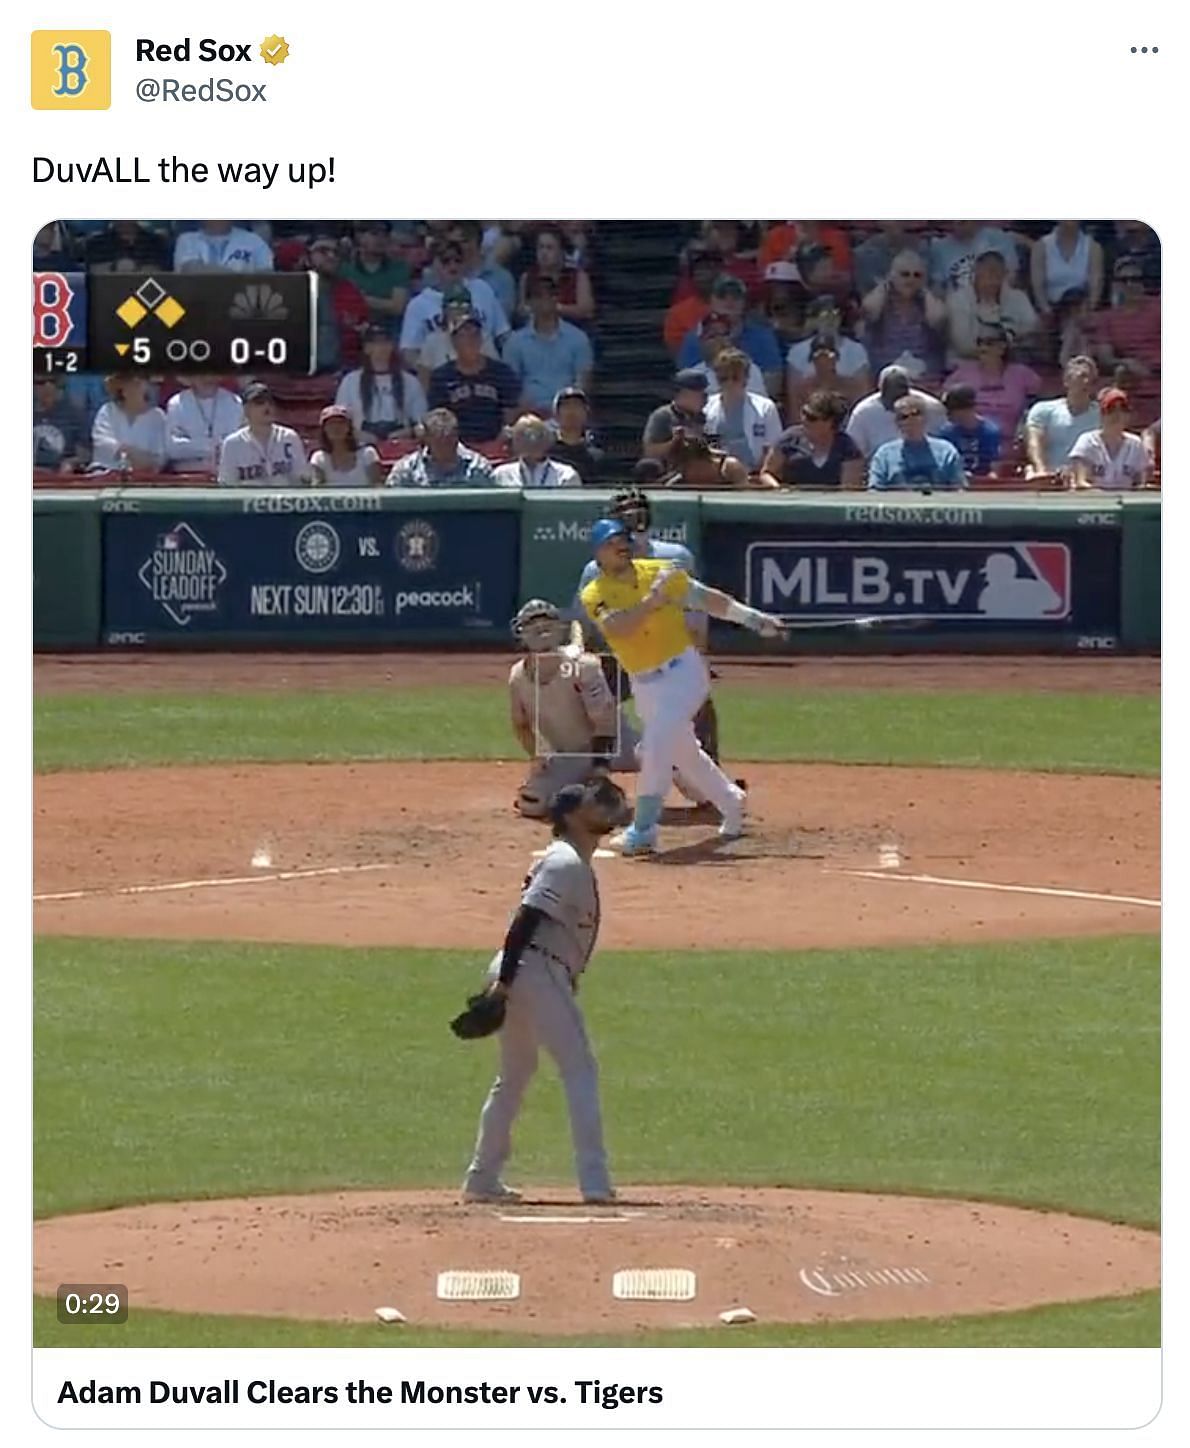 &quot;DuvALL the way up!&quot; - Red Sox